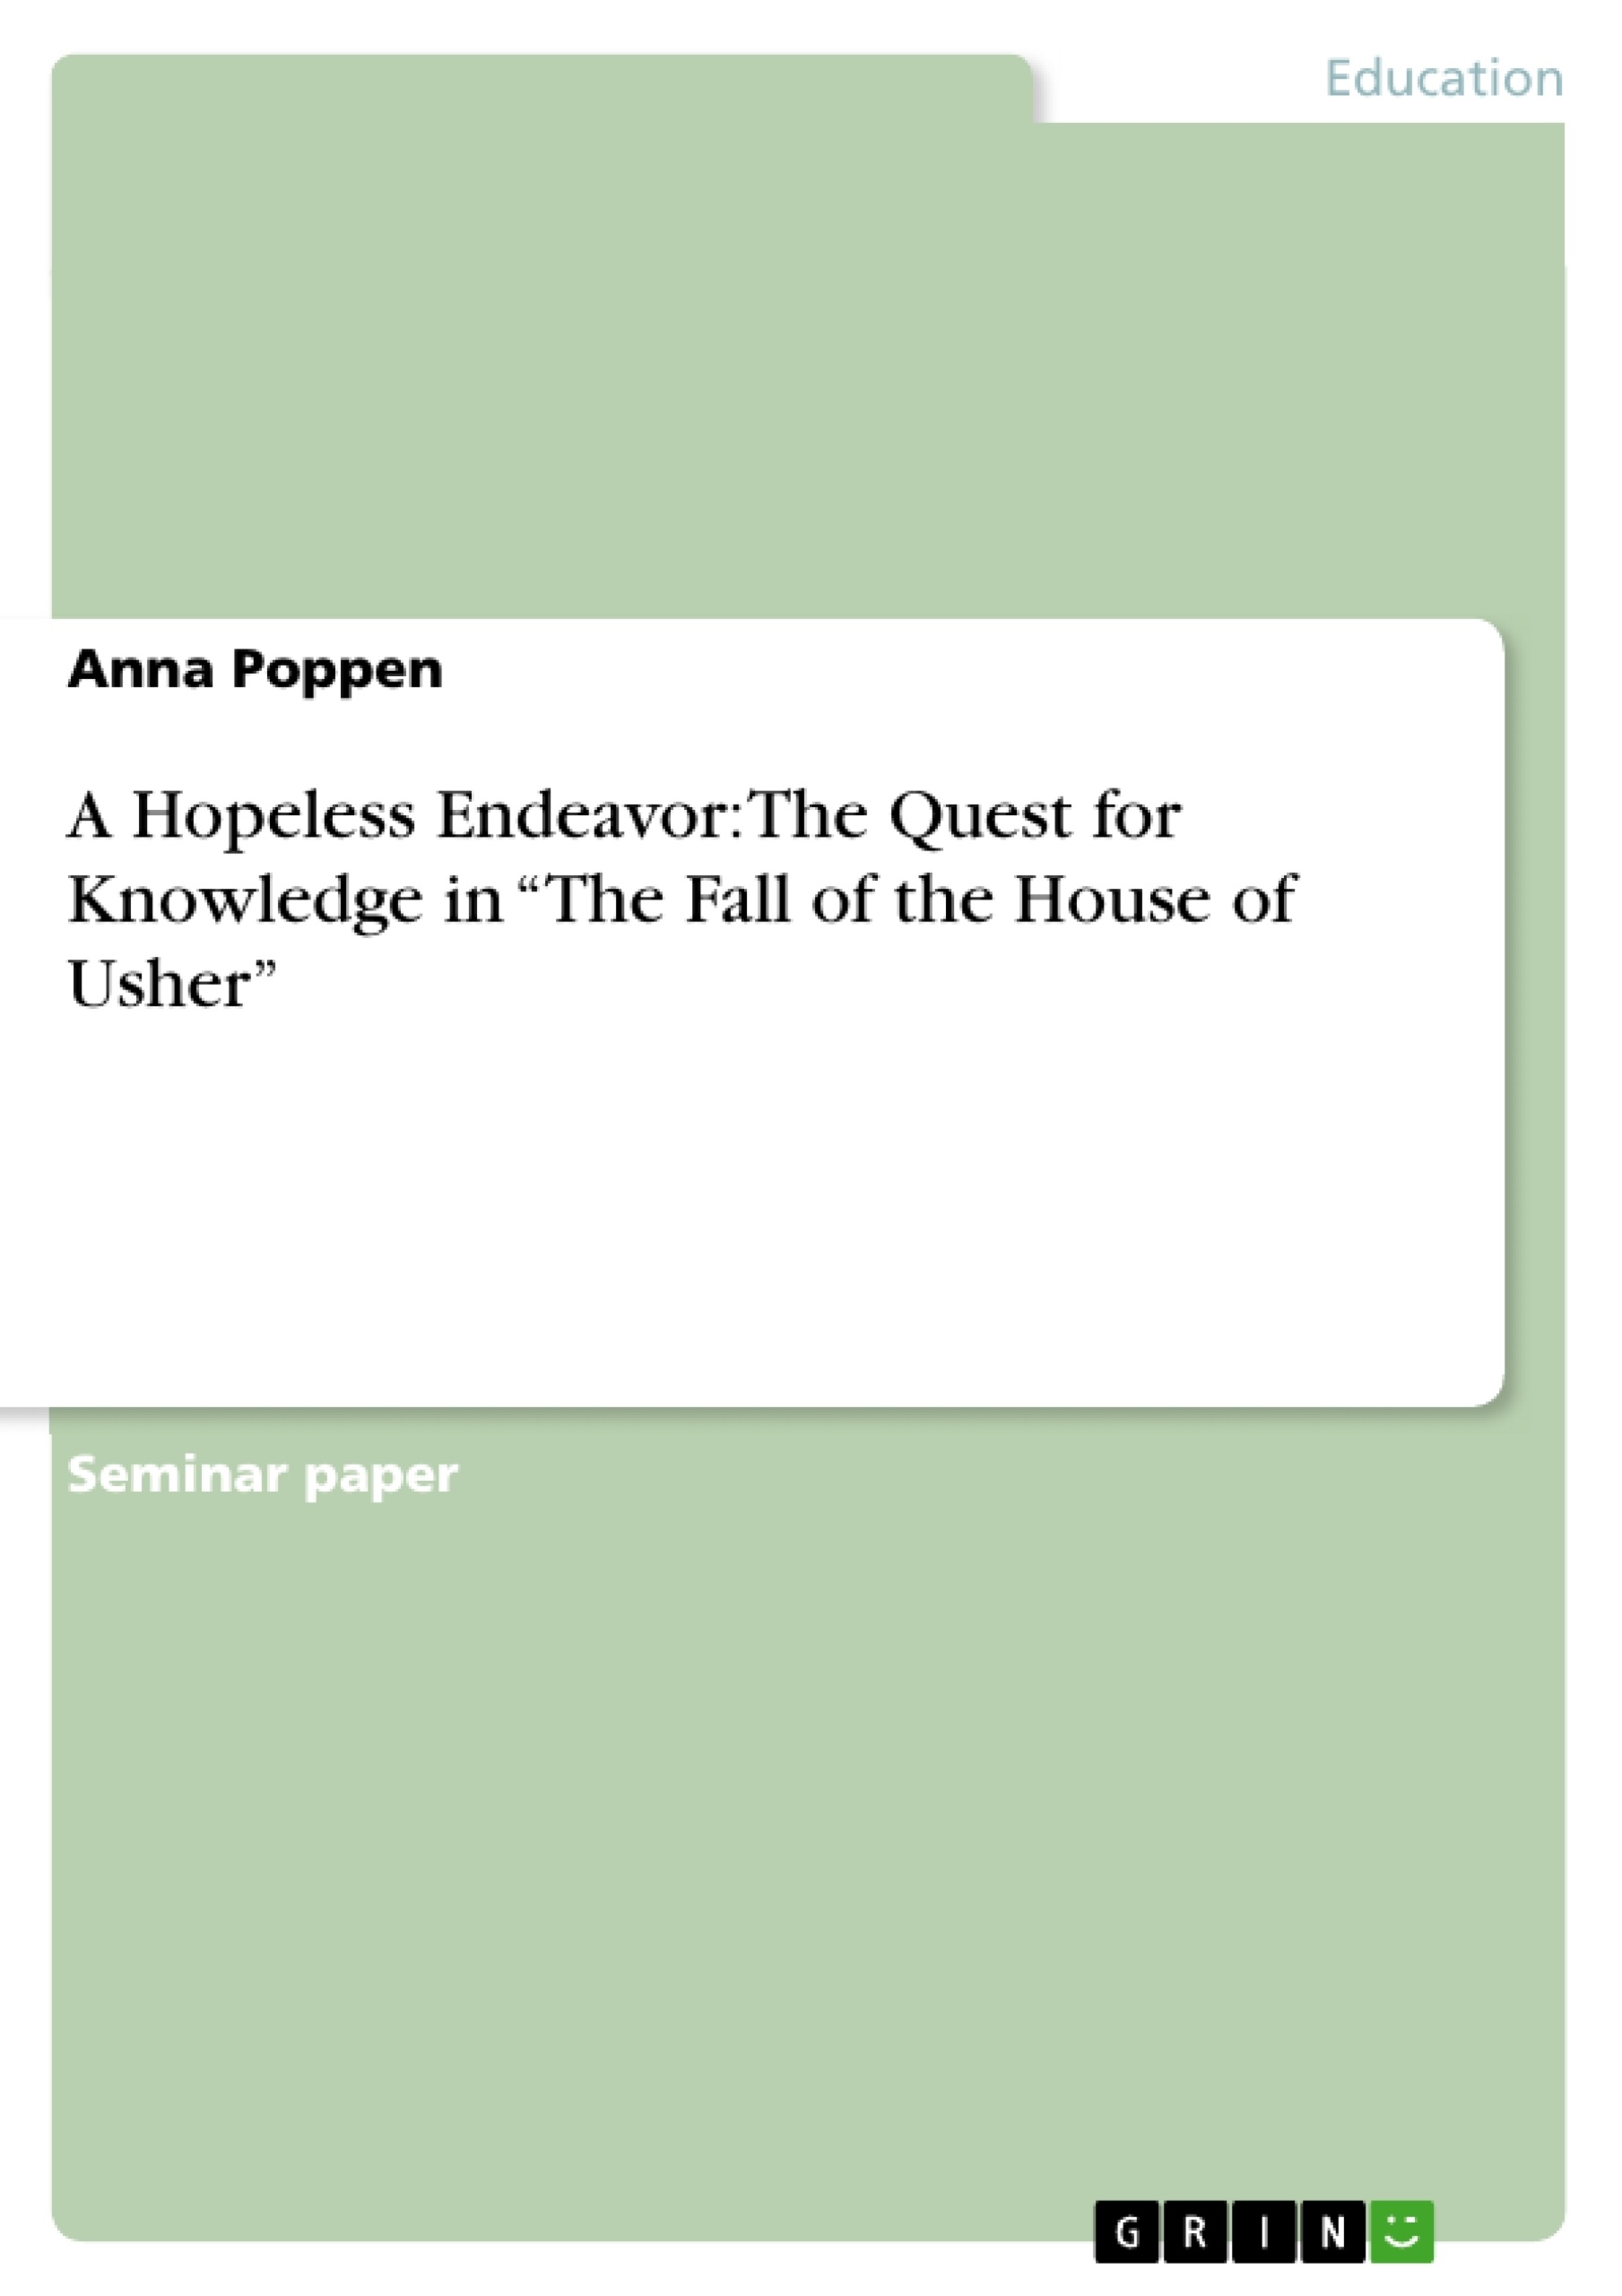 Title: A Hopeless Endeavor: The Quest for Knowledge in “The Fall of the House of Usher”